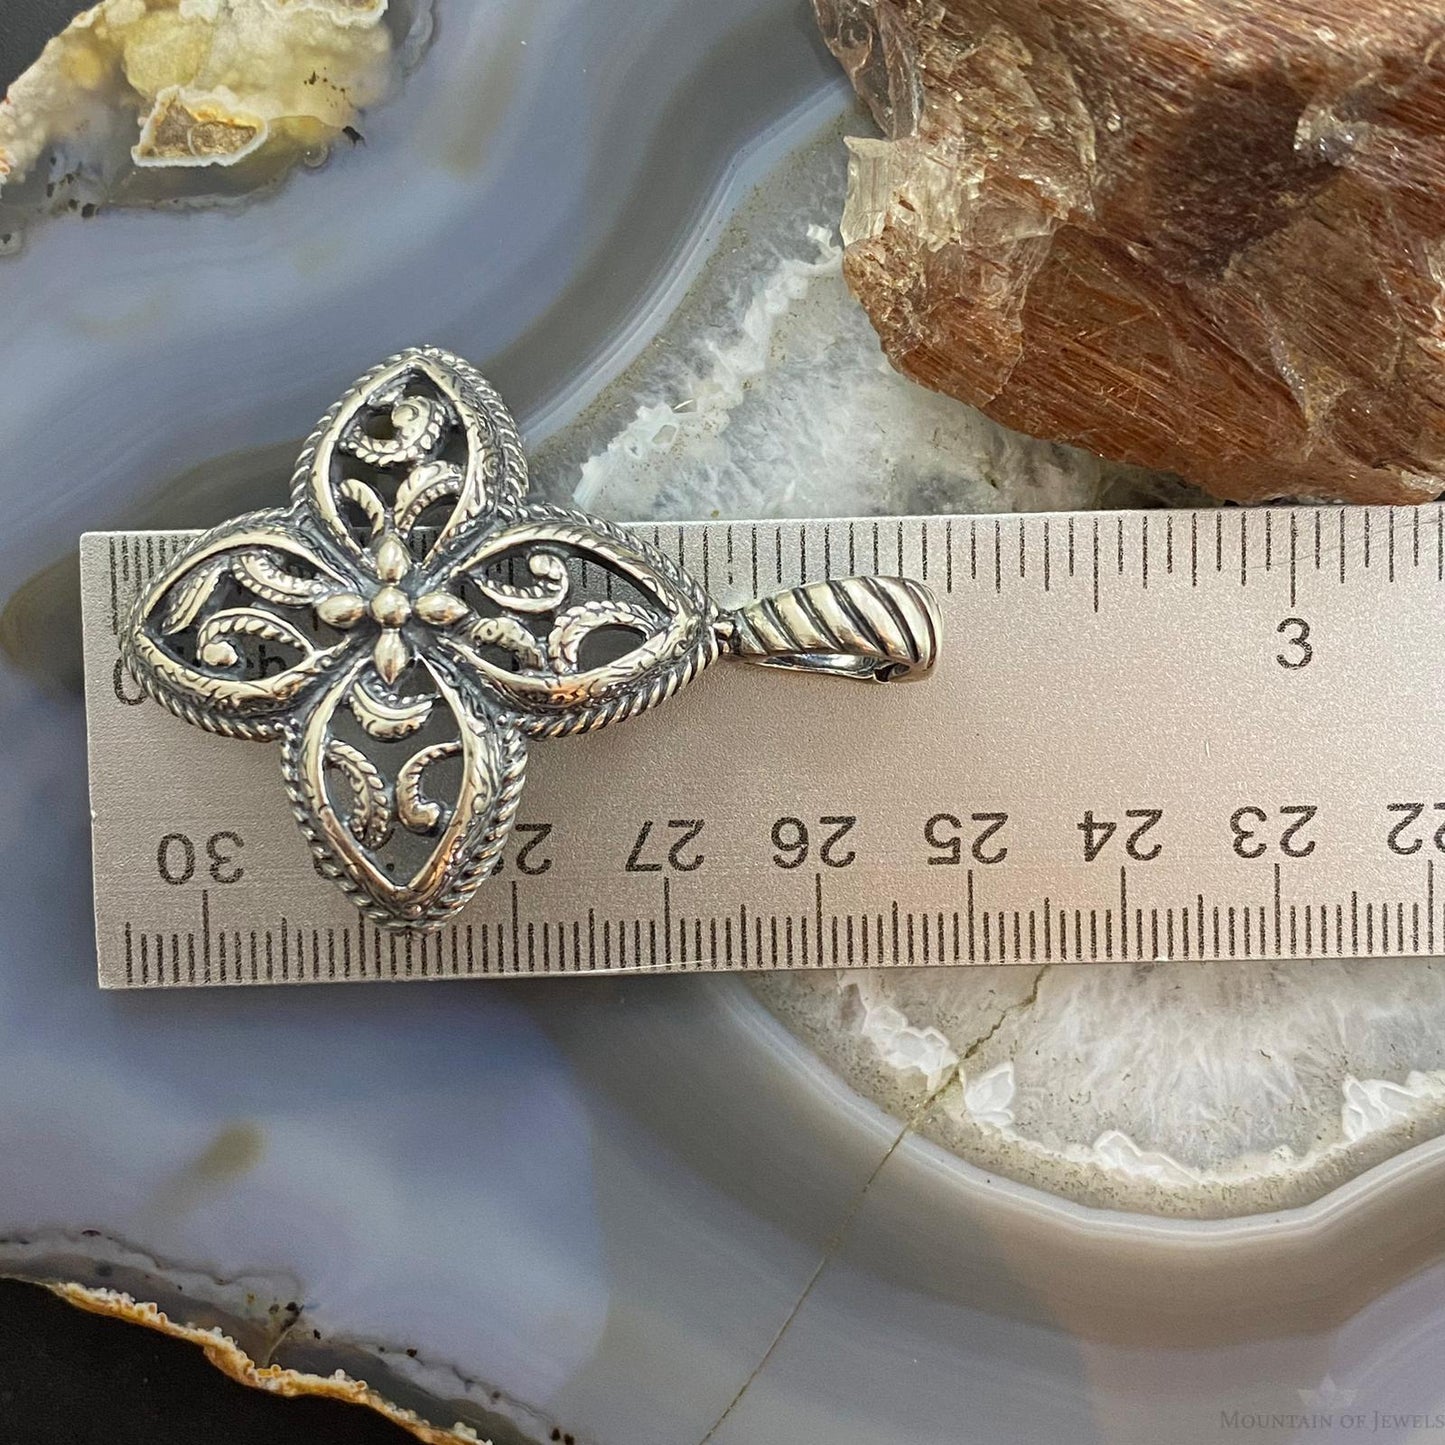 Carolyn Pollack Southwestern Style Sterling Silver Flower Decorated Enhancer Pendant For Women